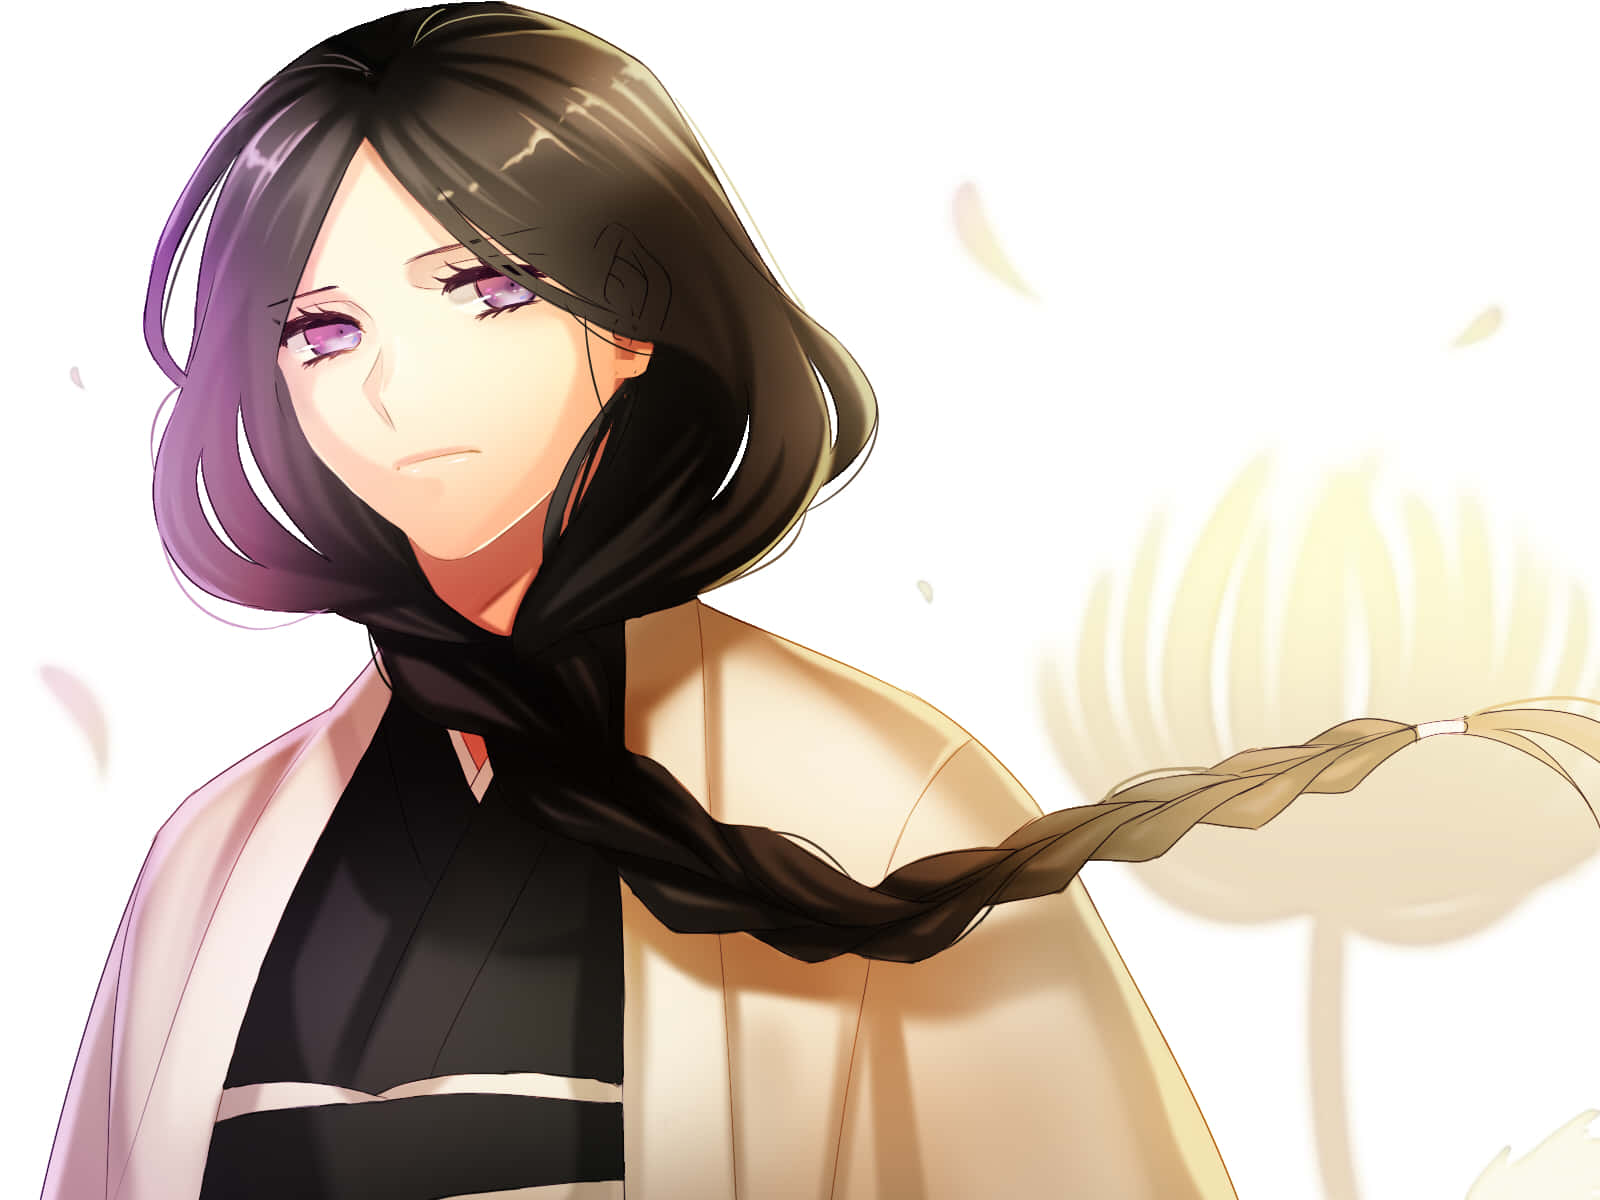 Unohana Retsu in Bleach - "No matter where I am, I shall protect you with my own hands." Wallpaper